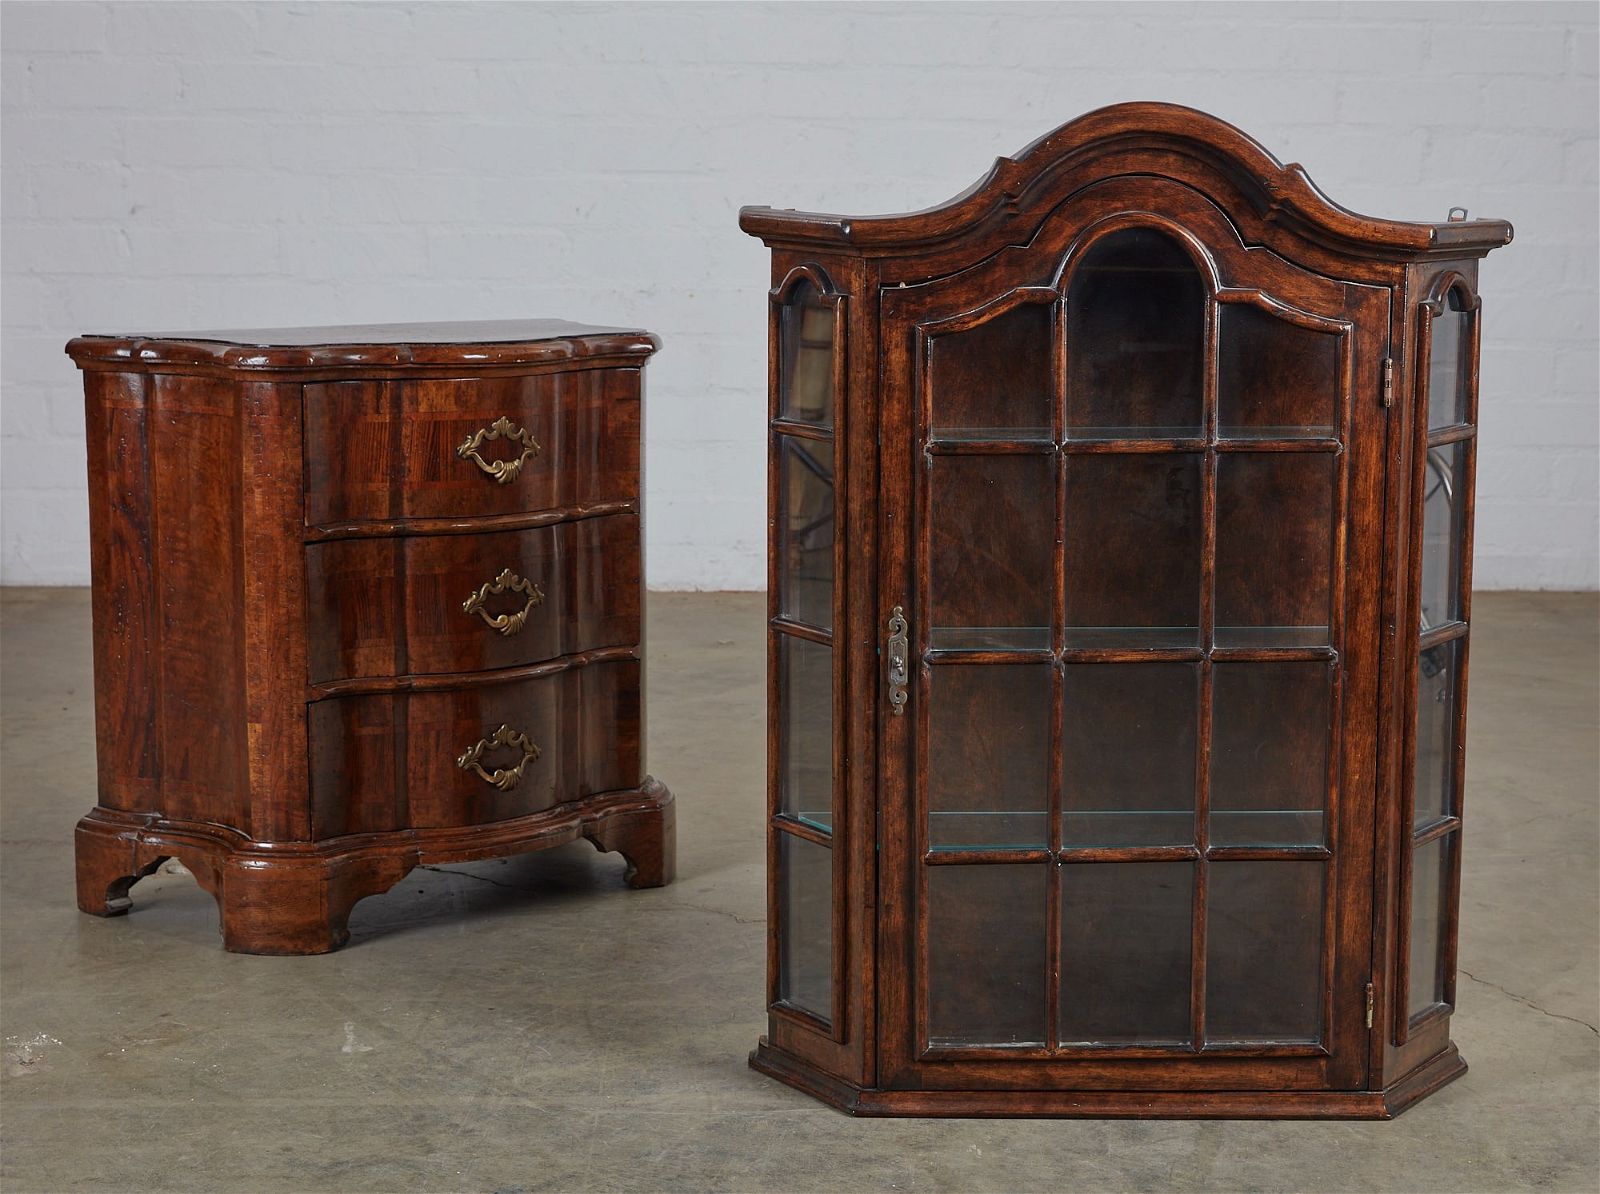 A CONTINENTAL BAROQUE STYLE CABINET